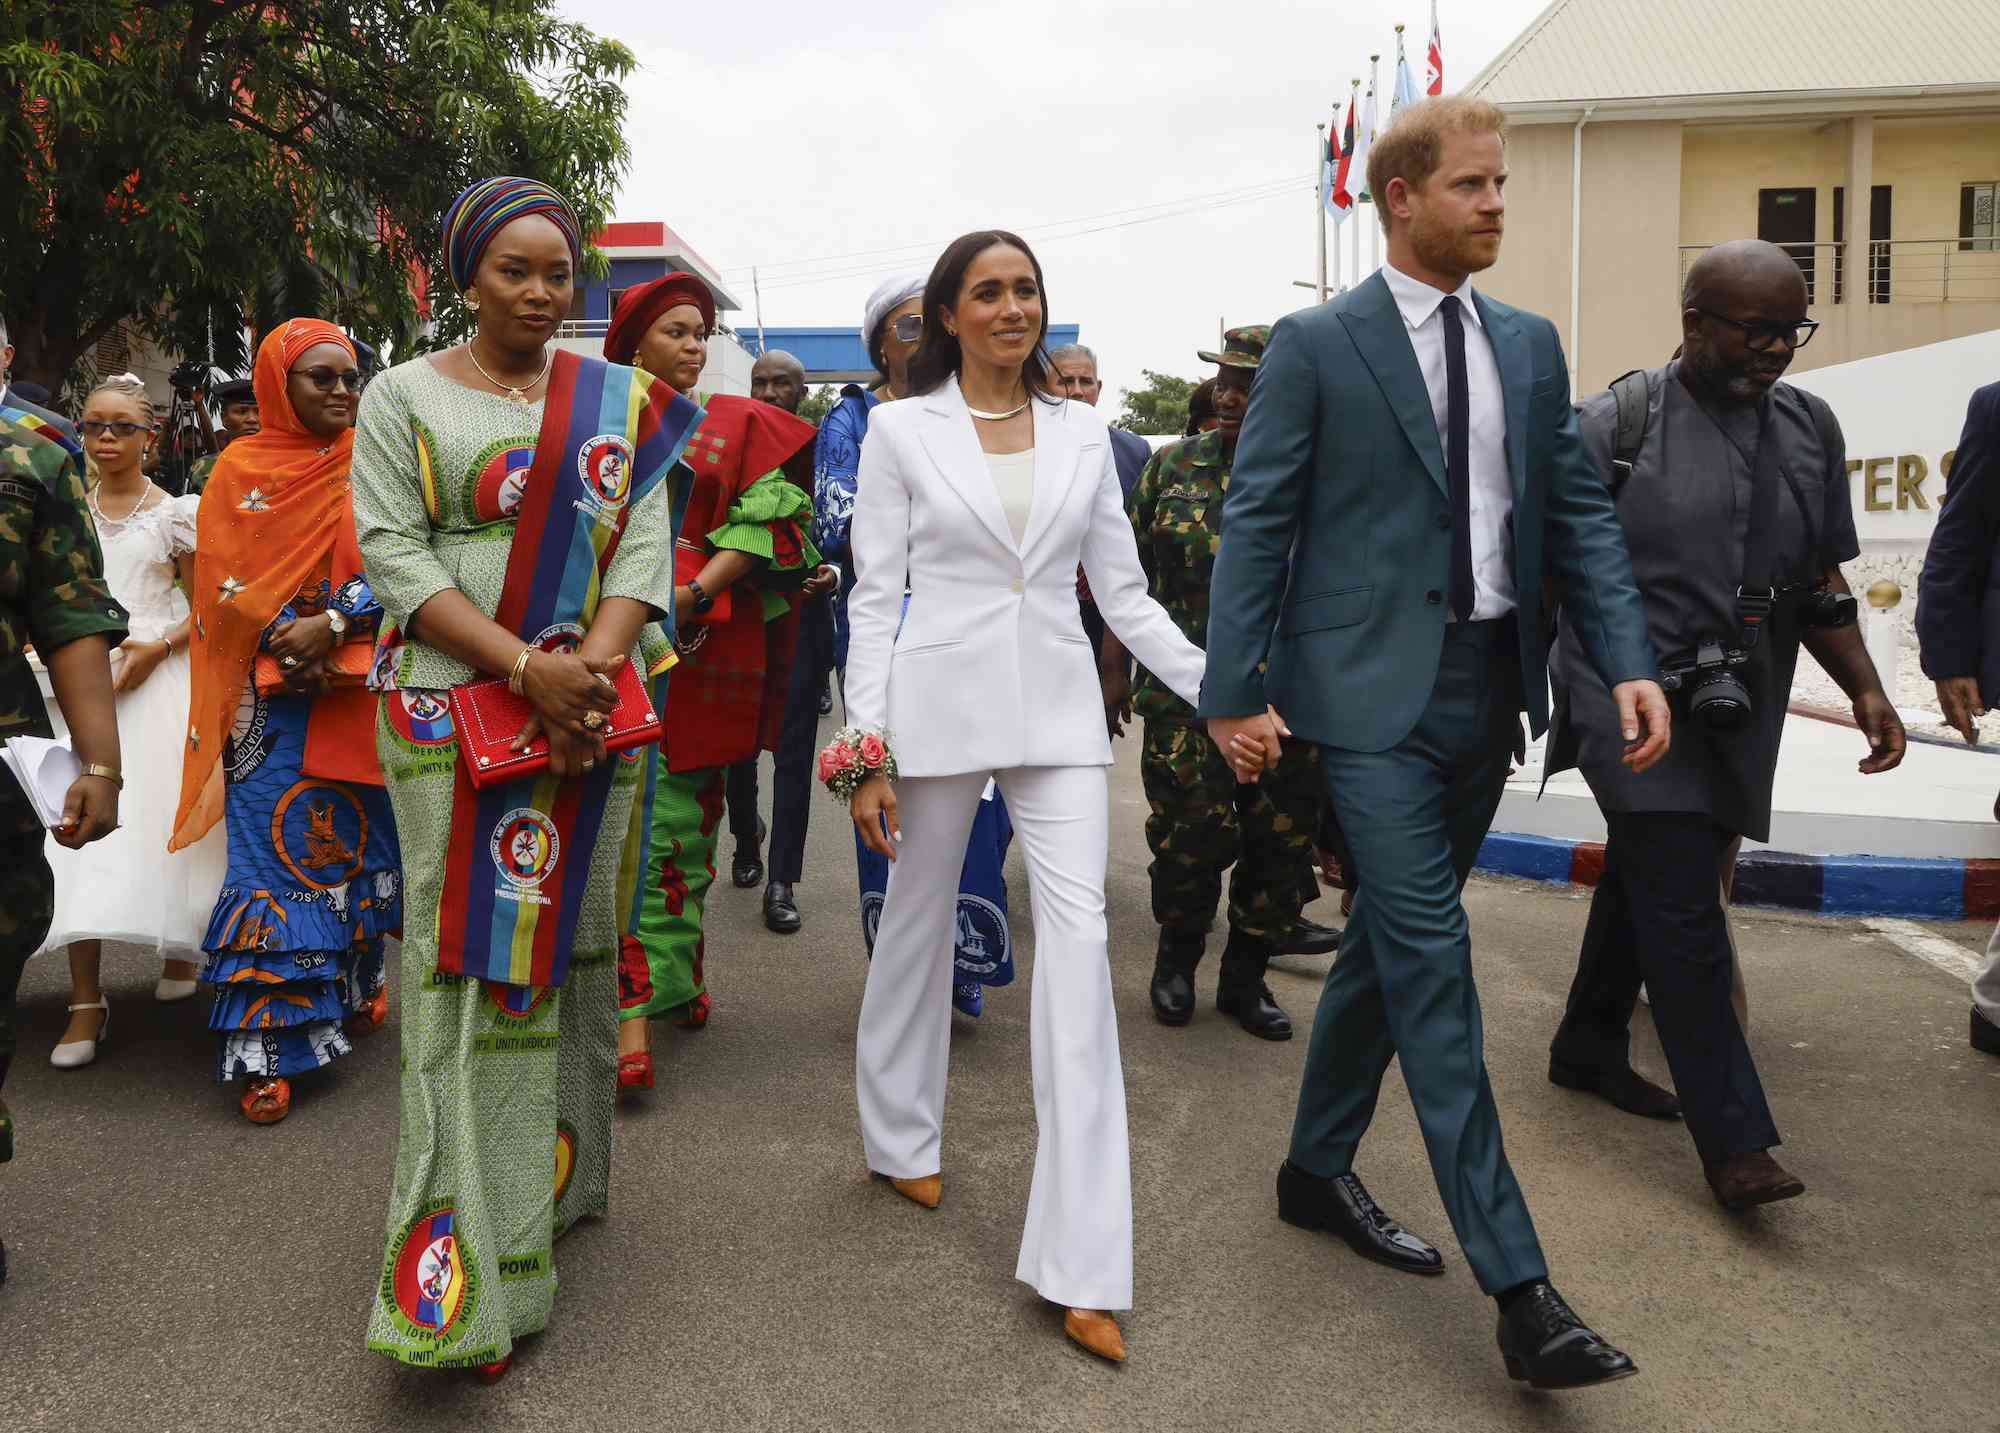 Meghan Markle Nails Business Chic in an All-White Suit on Her Nigerian Tour